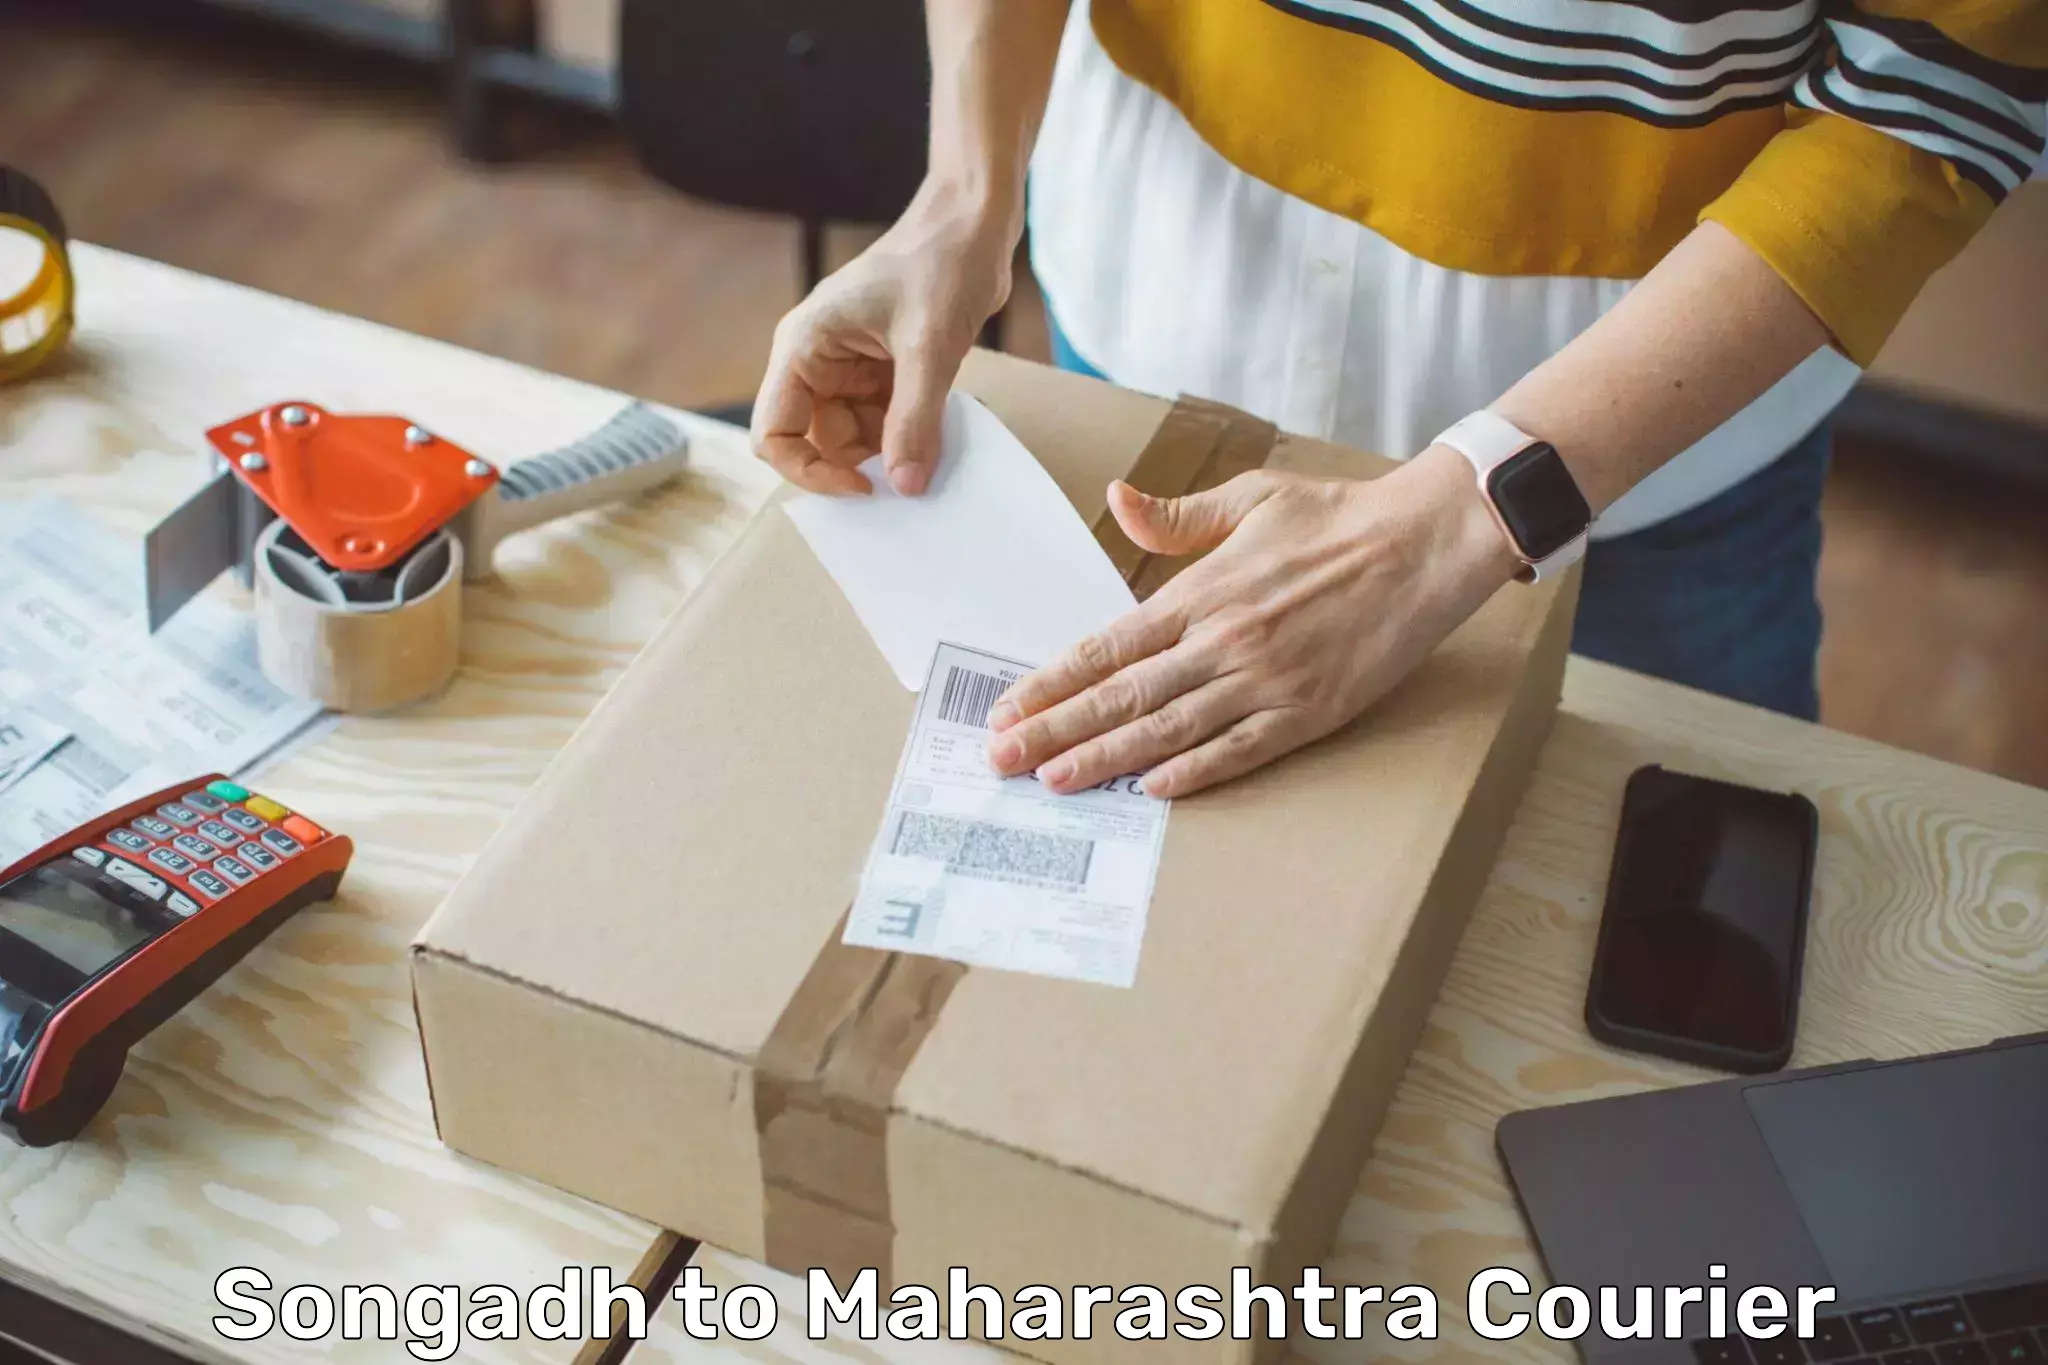 Modern courier technology Songadh to Maharashtra